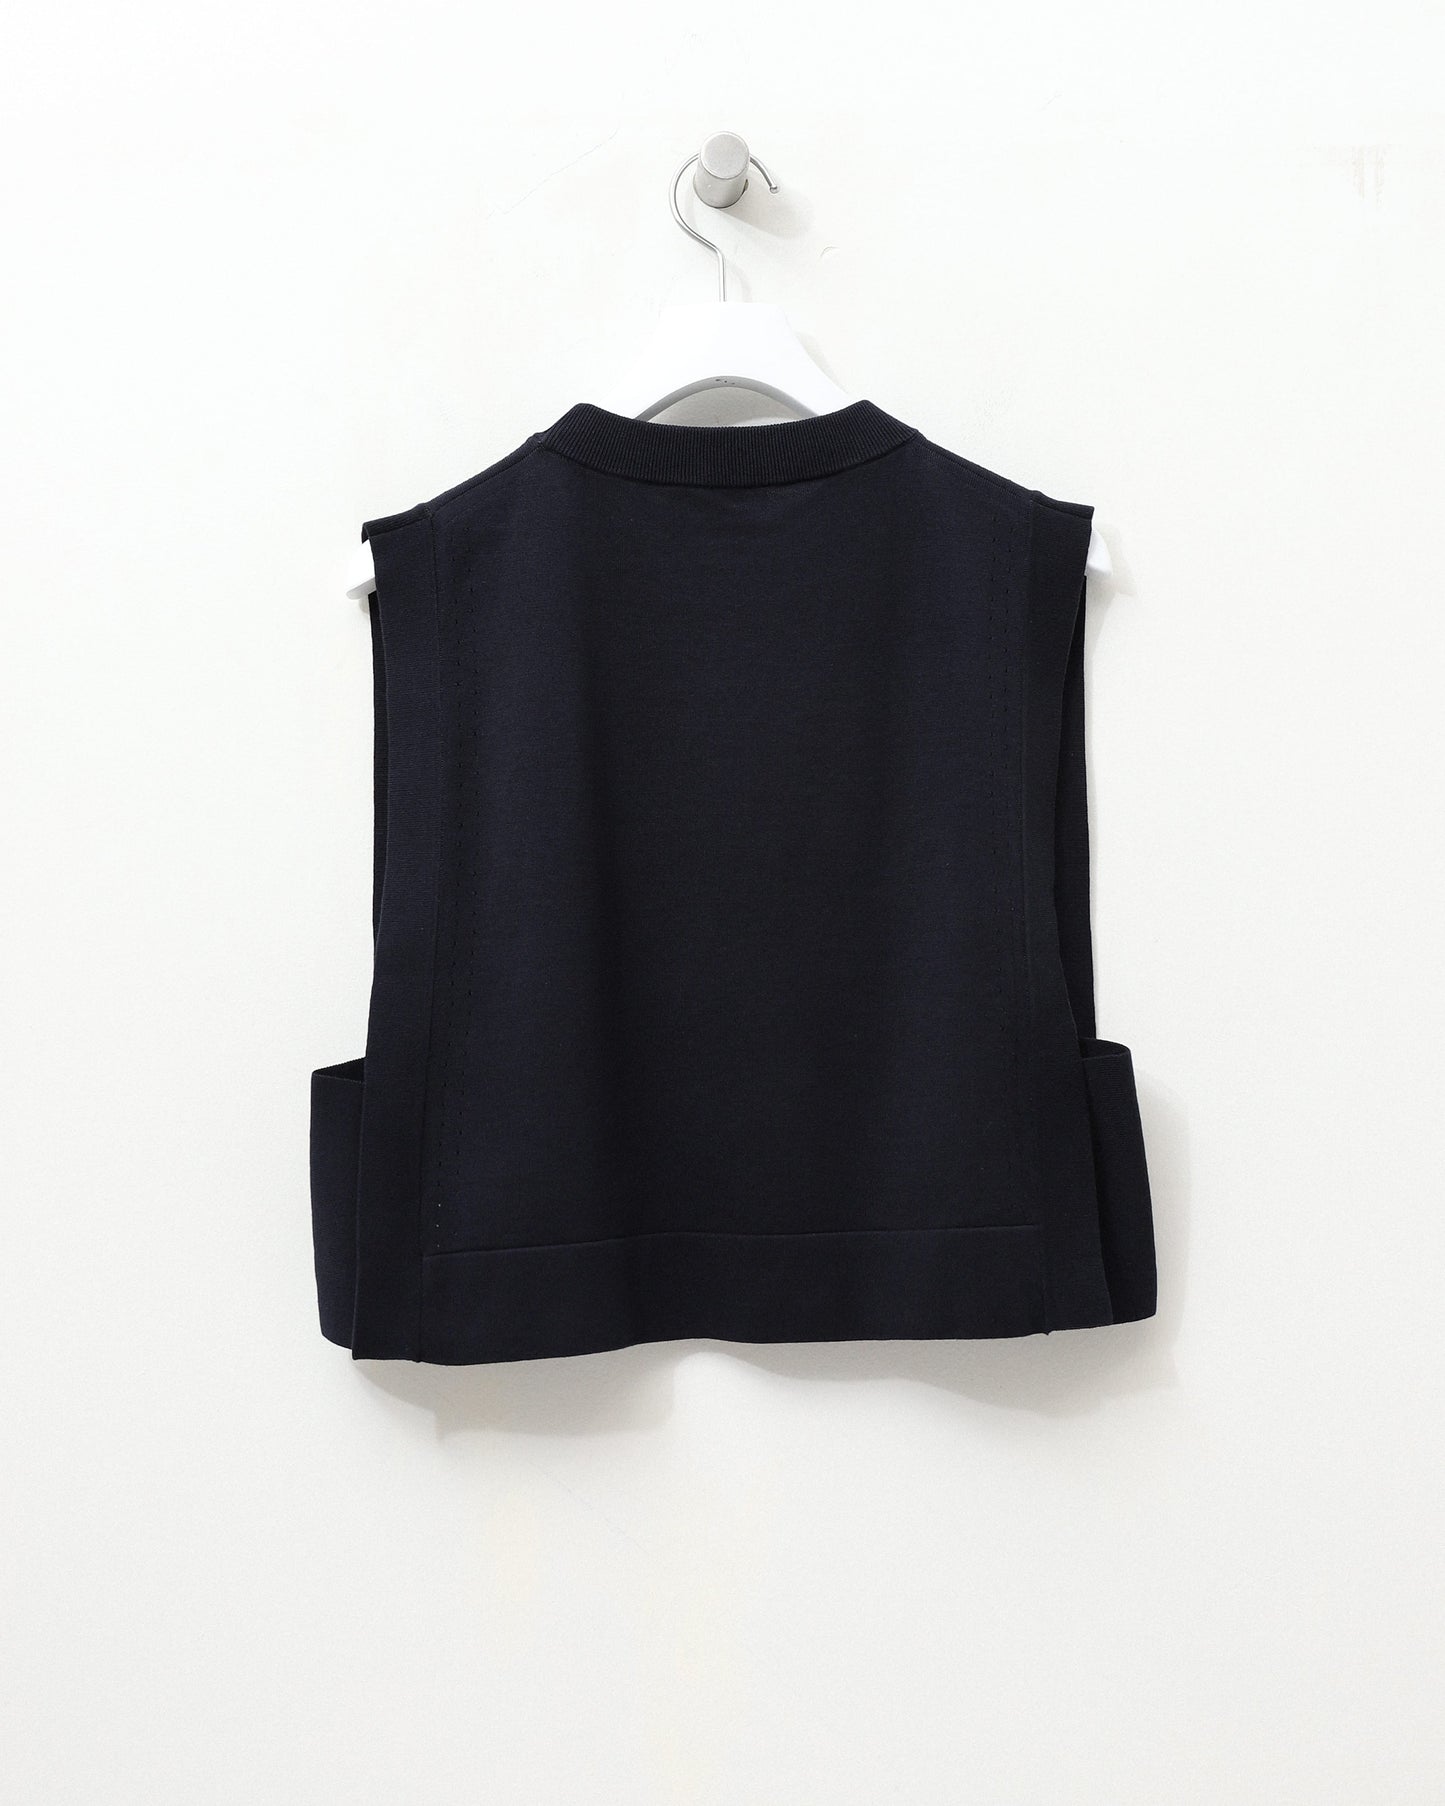 CROPPED TOP SWEATER 11345